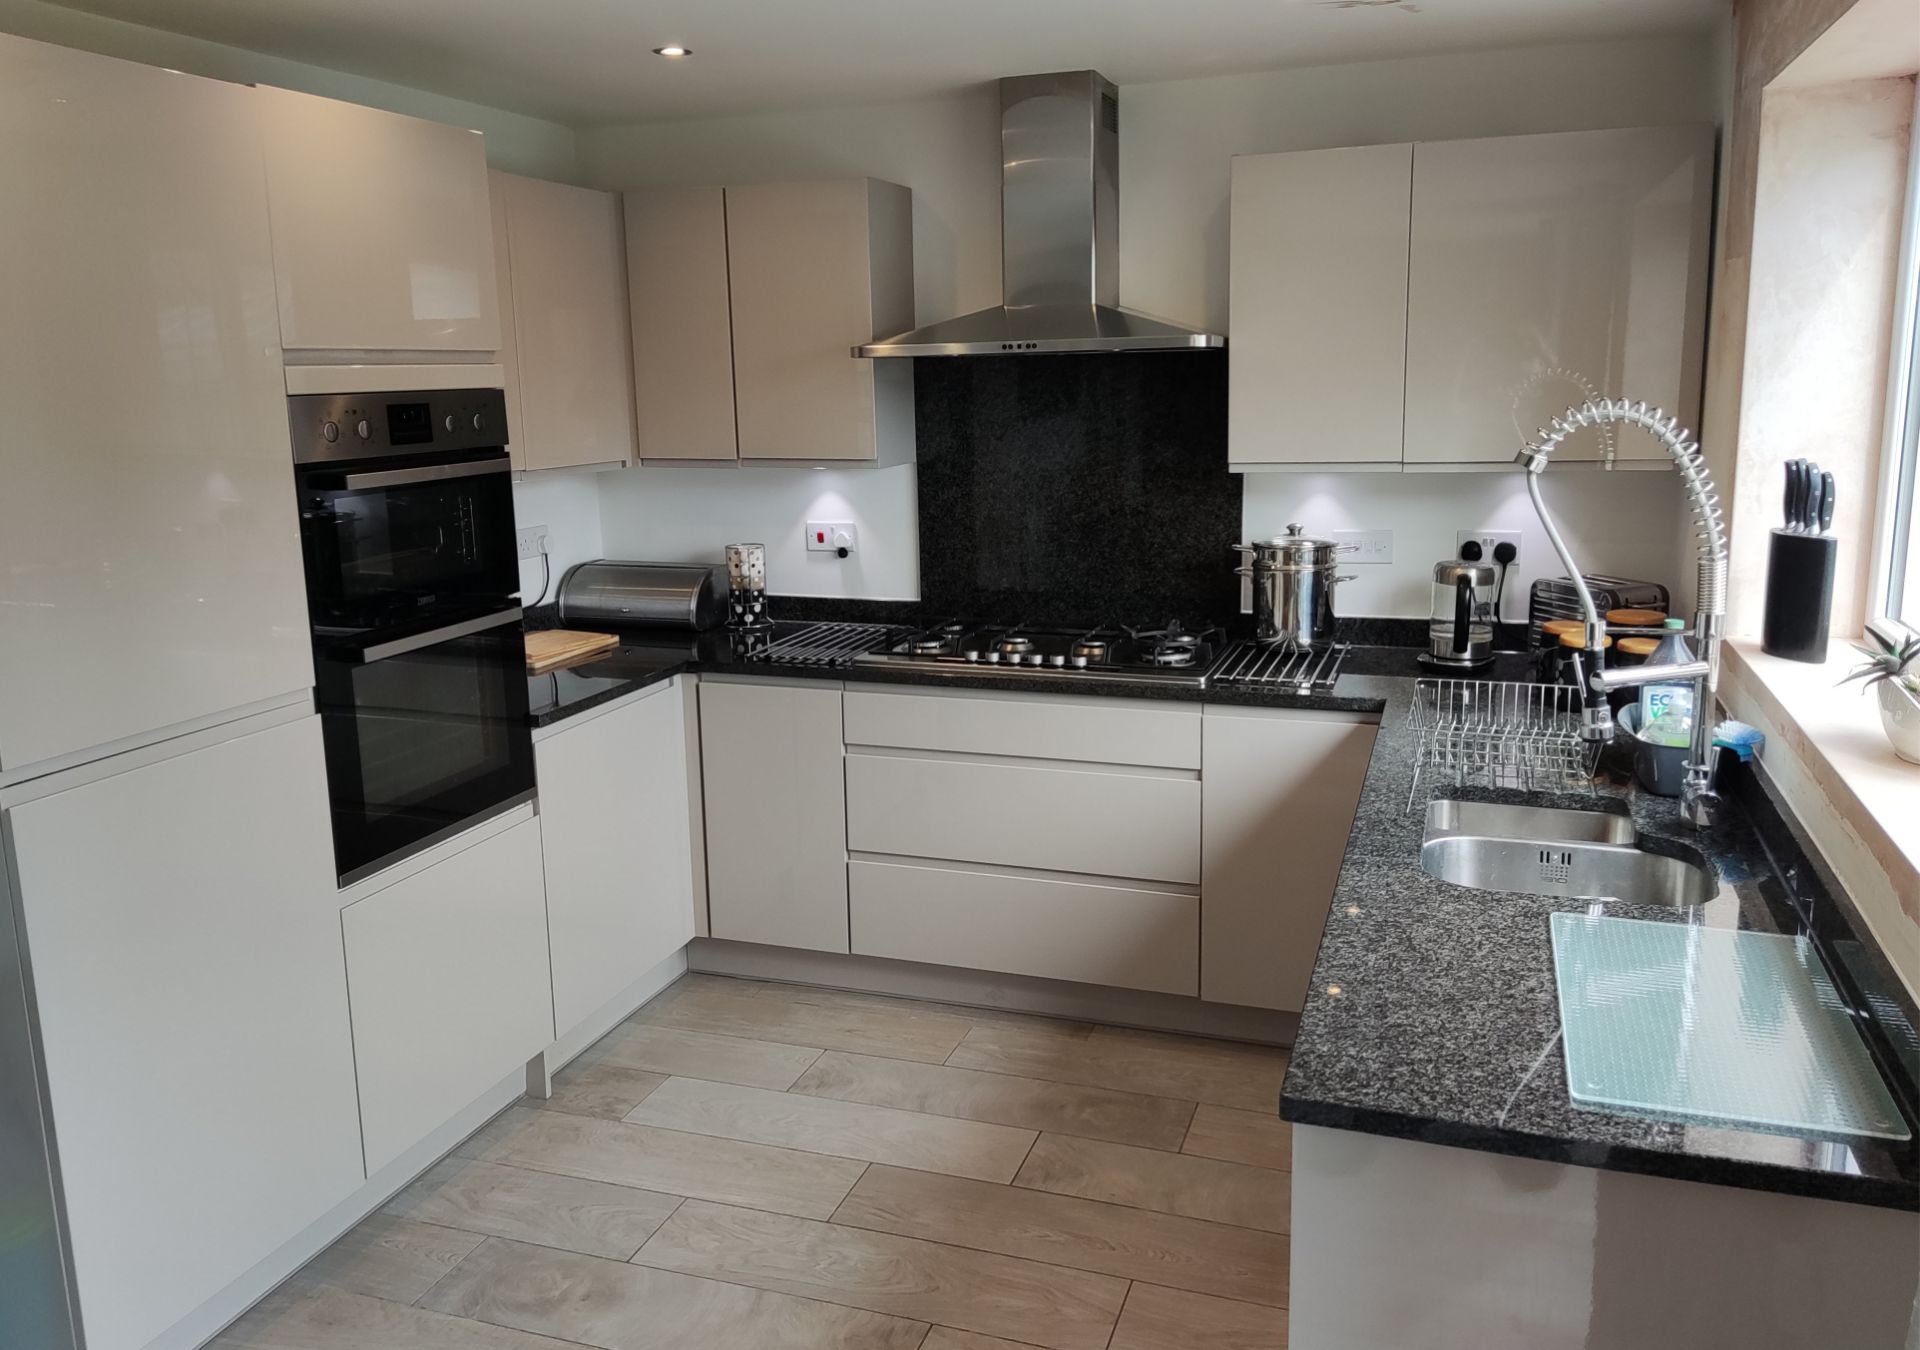 1 x Modern Handleless Kitchen Featuring Granite Worktops, A Double Oven, And Under-lighting - NO VAT - Image 11 of 56